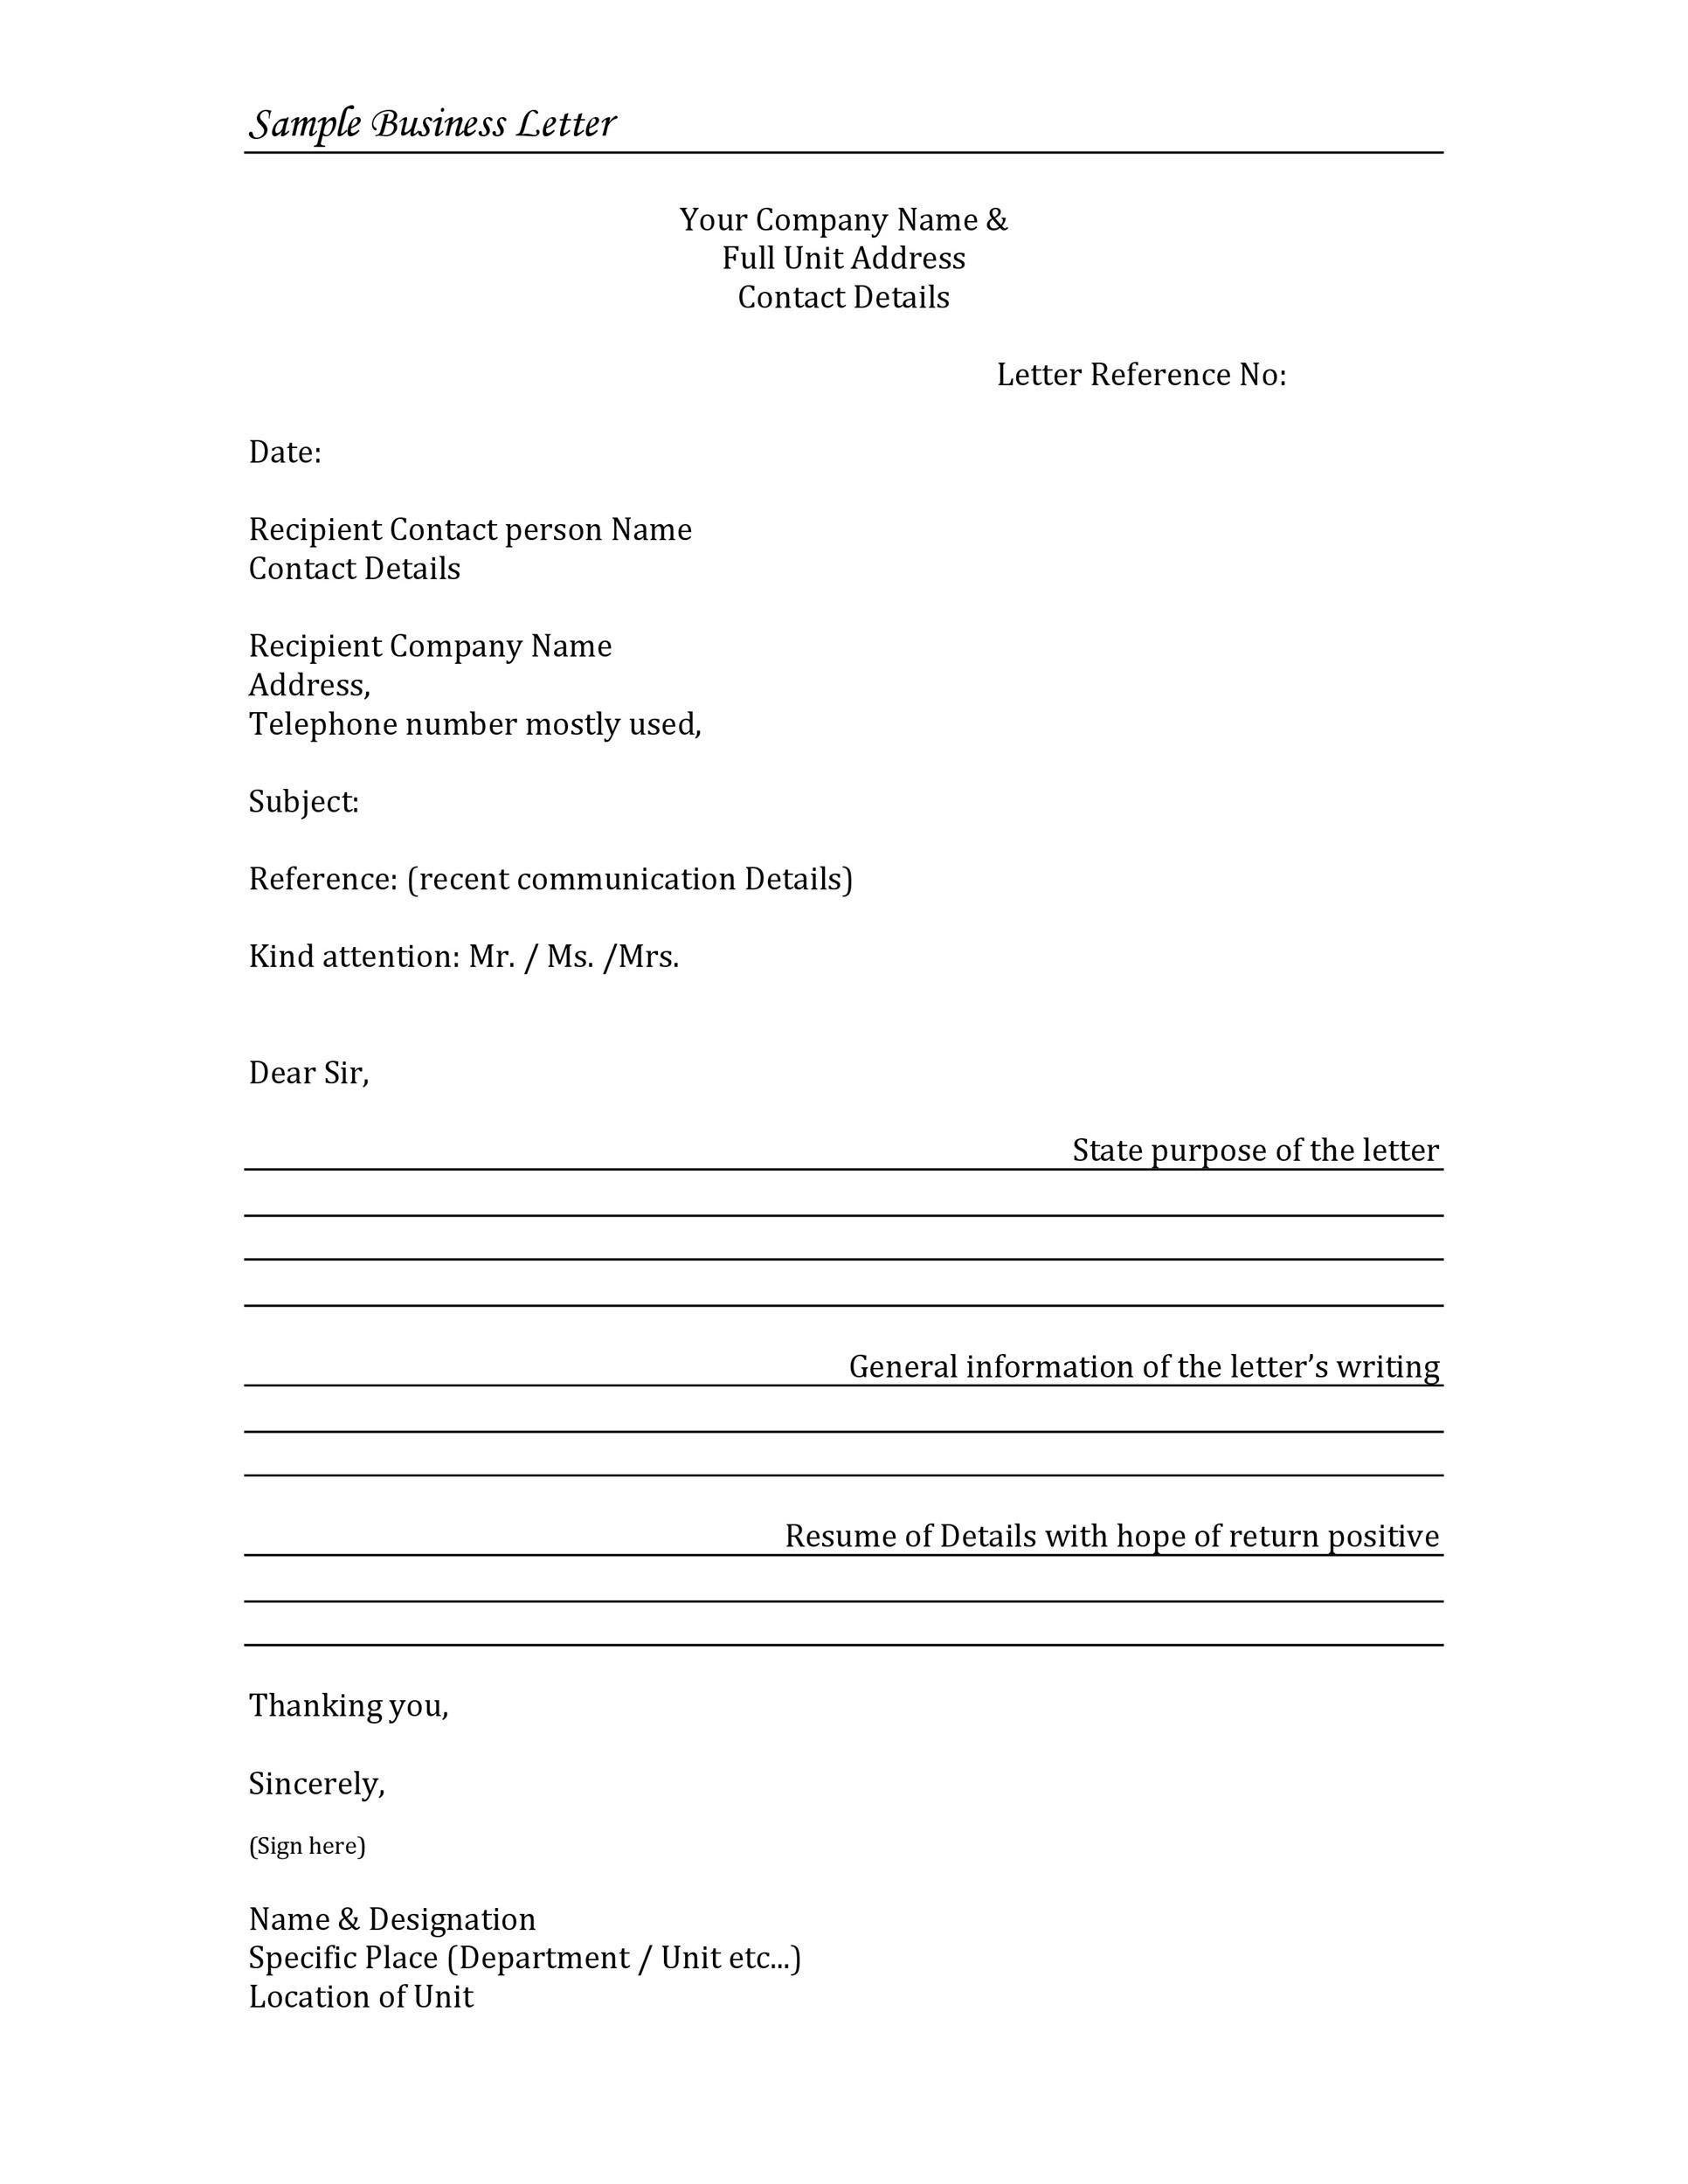 Sample Business Letter Template from templatelab.com